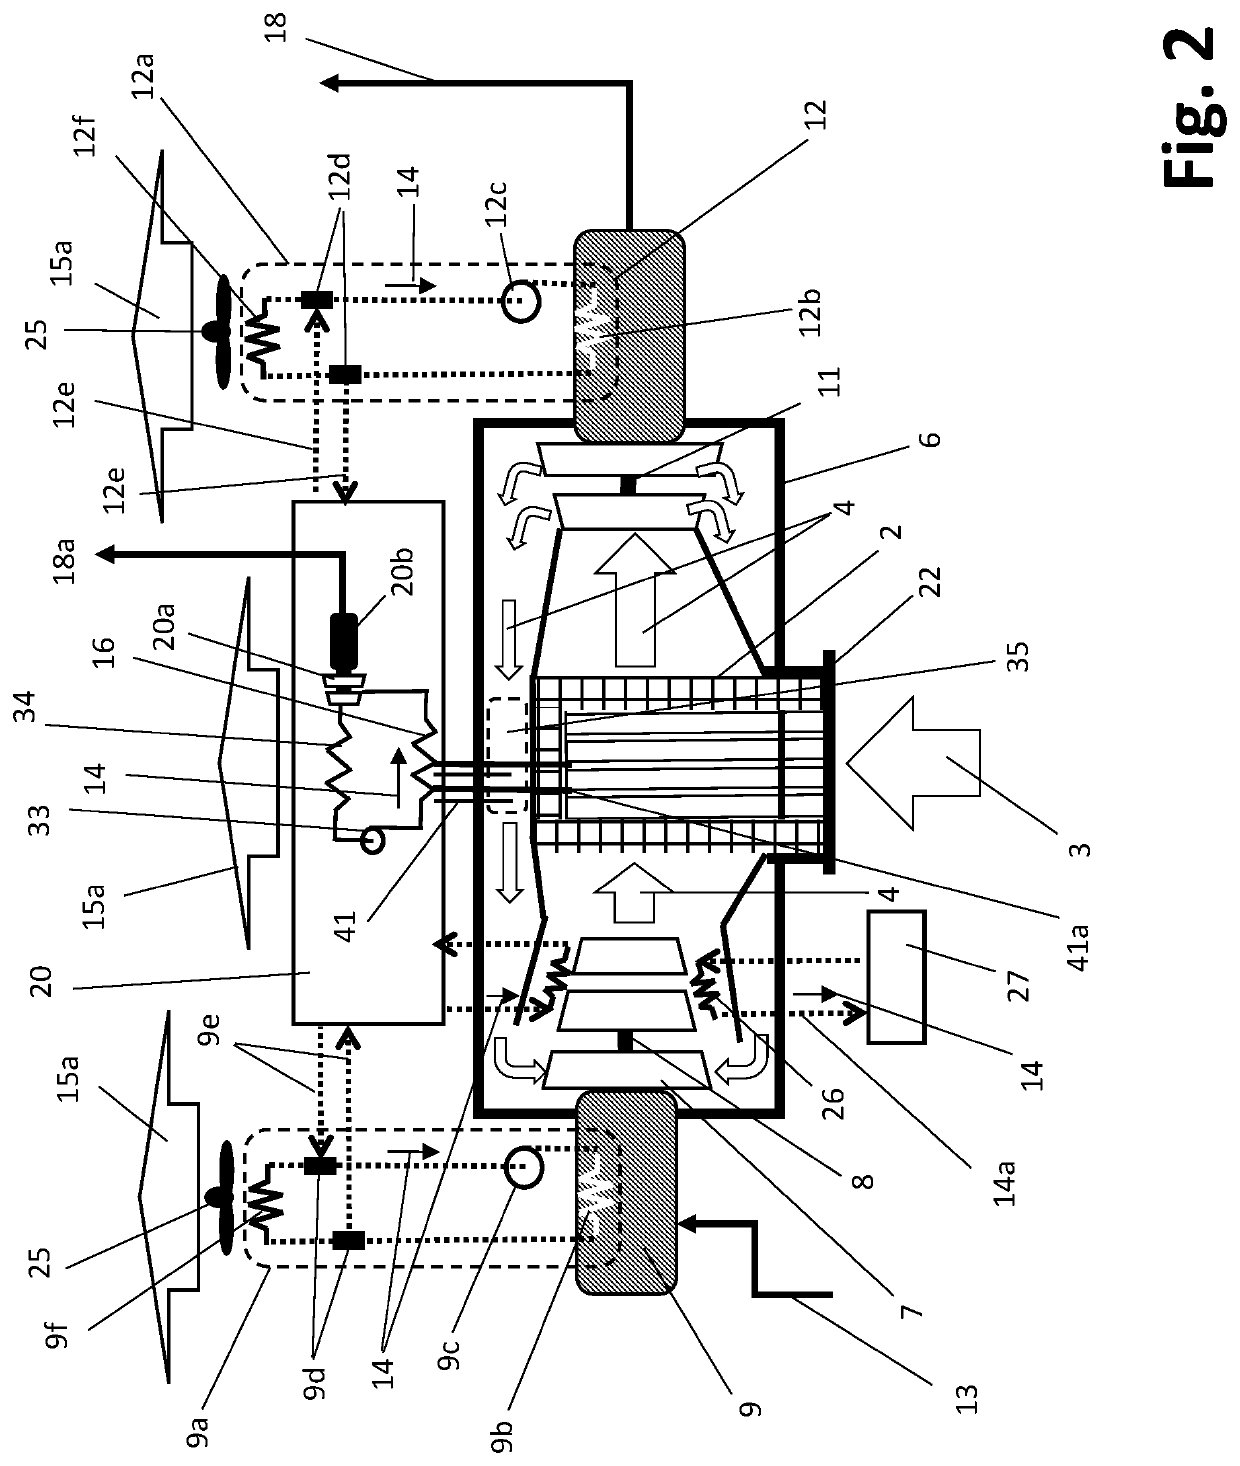 Power conversion system for nuclear power generators and related methods